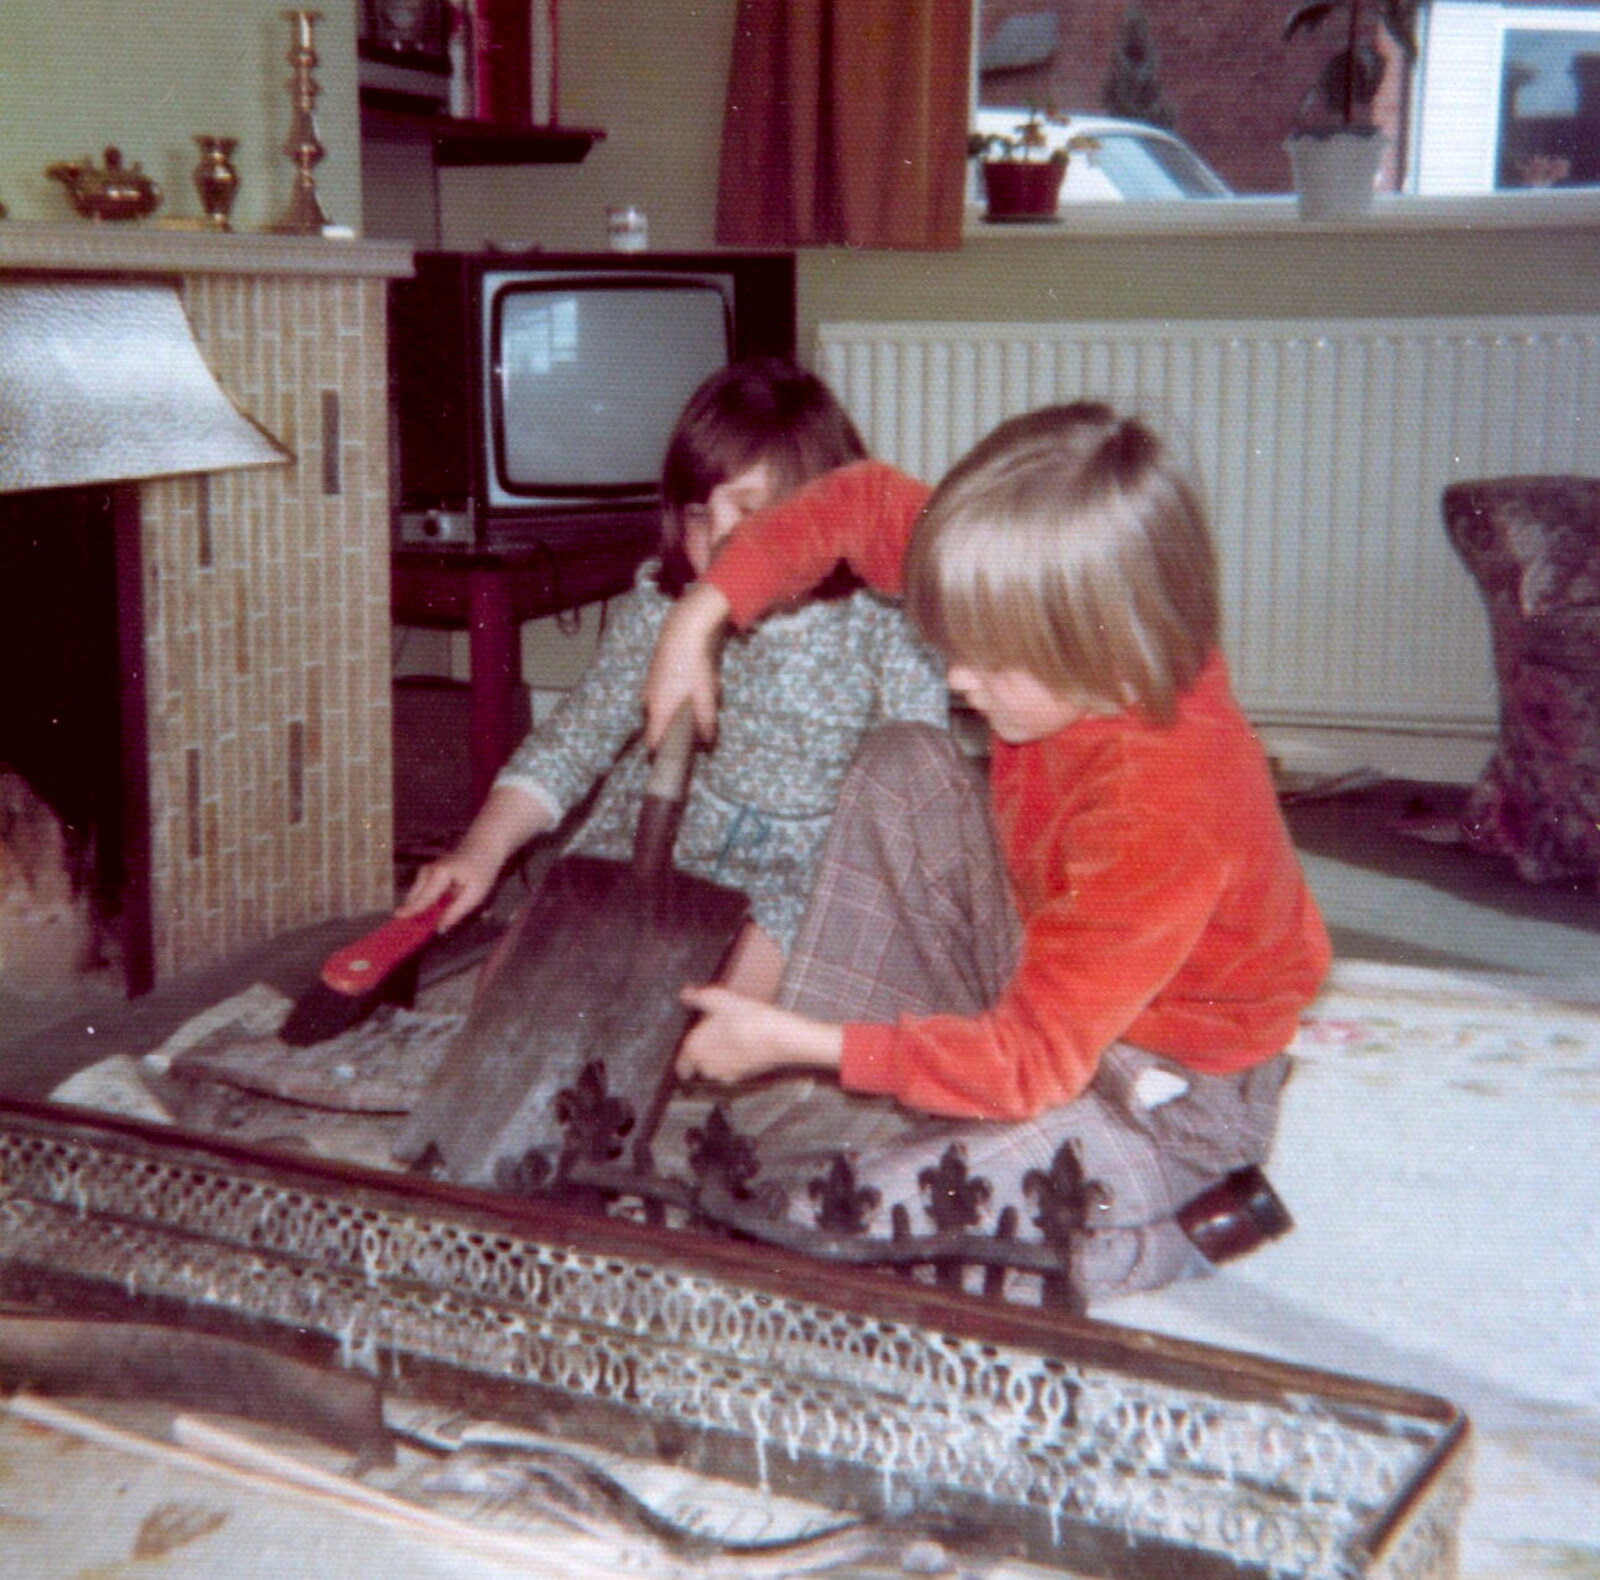 Family History: Birtle's Close, Sandbach, Cheshire - 24th January 2020: Cleaning out the fireplace in the lounge